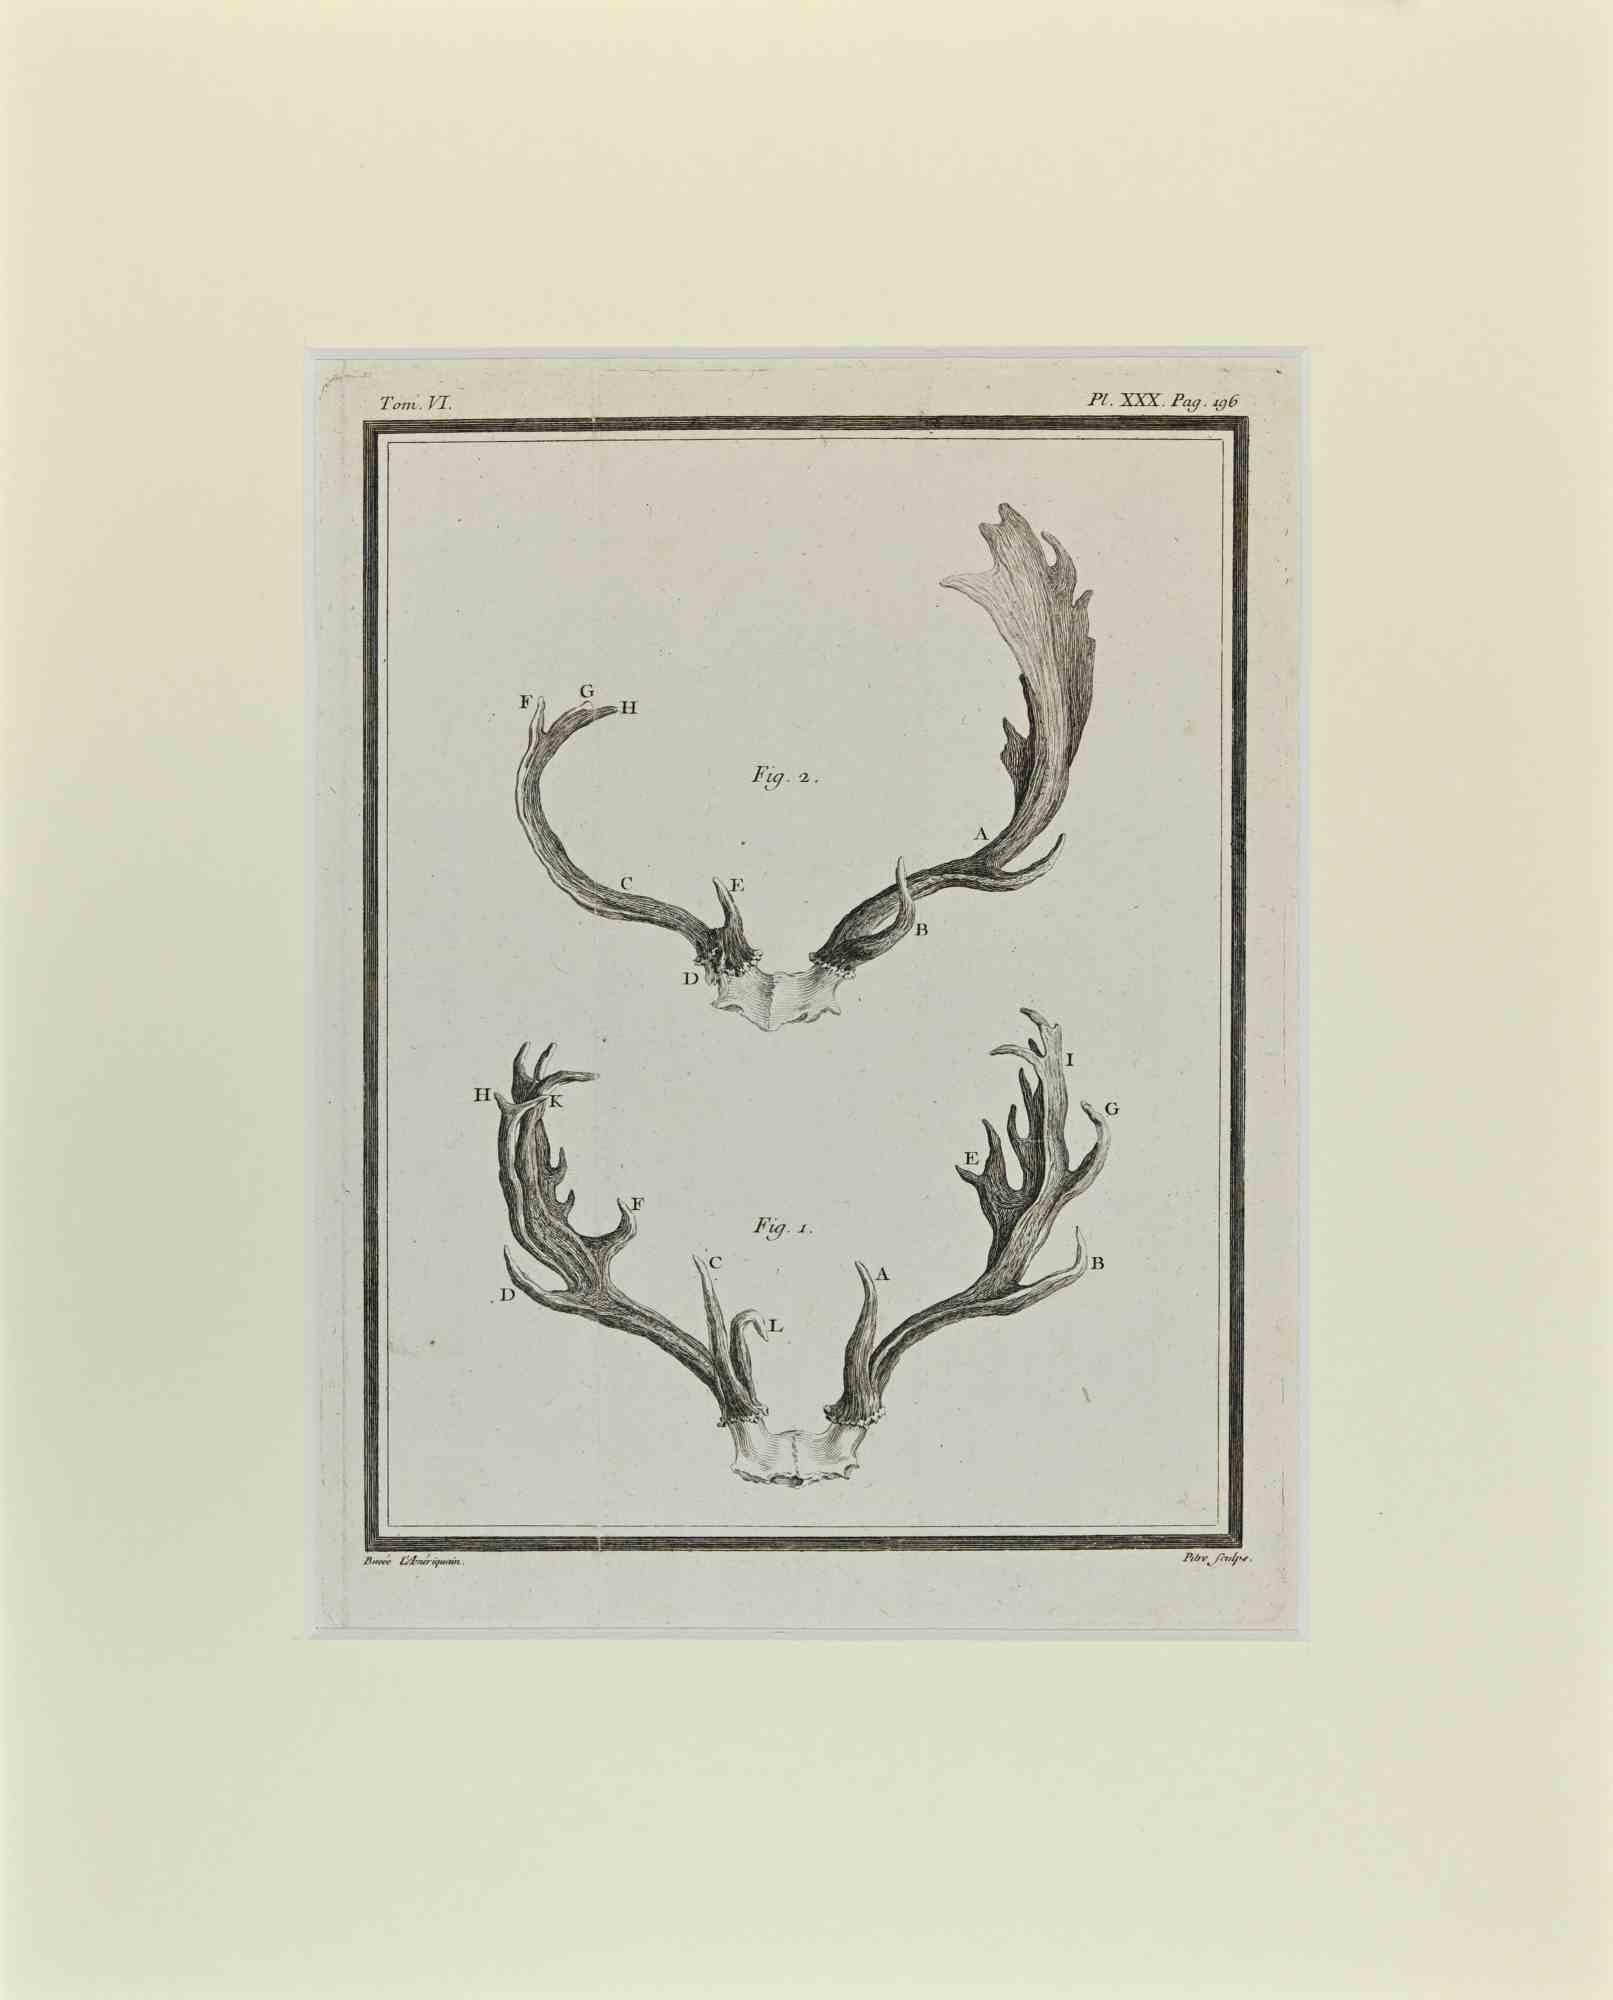 Deer horns is an artwork realized  by  Buvée l'Américain in 1771.  

Etching B./W. print  on ivory paper. Signed on  plate on the lower left margin.

The work is glued on cardboard. Total dimensions: 35x28 cm.

The artwork belongs to the suite